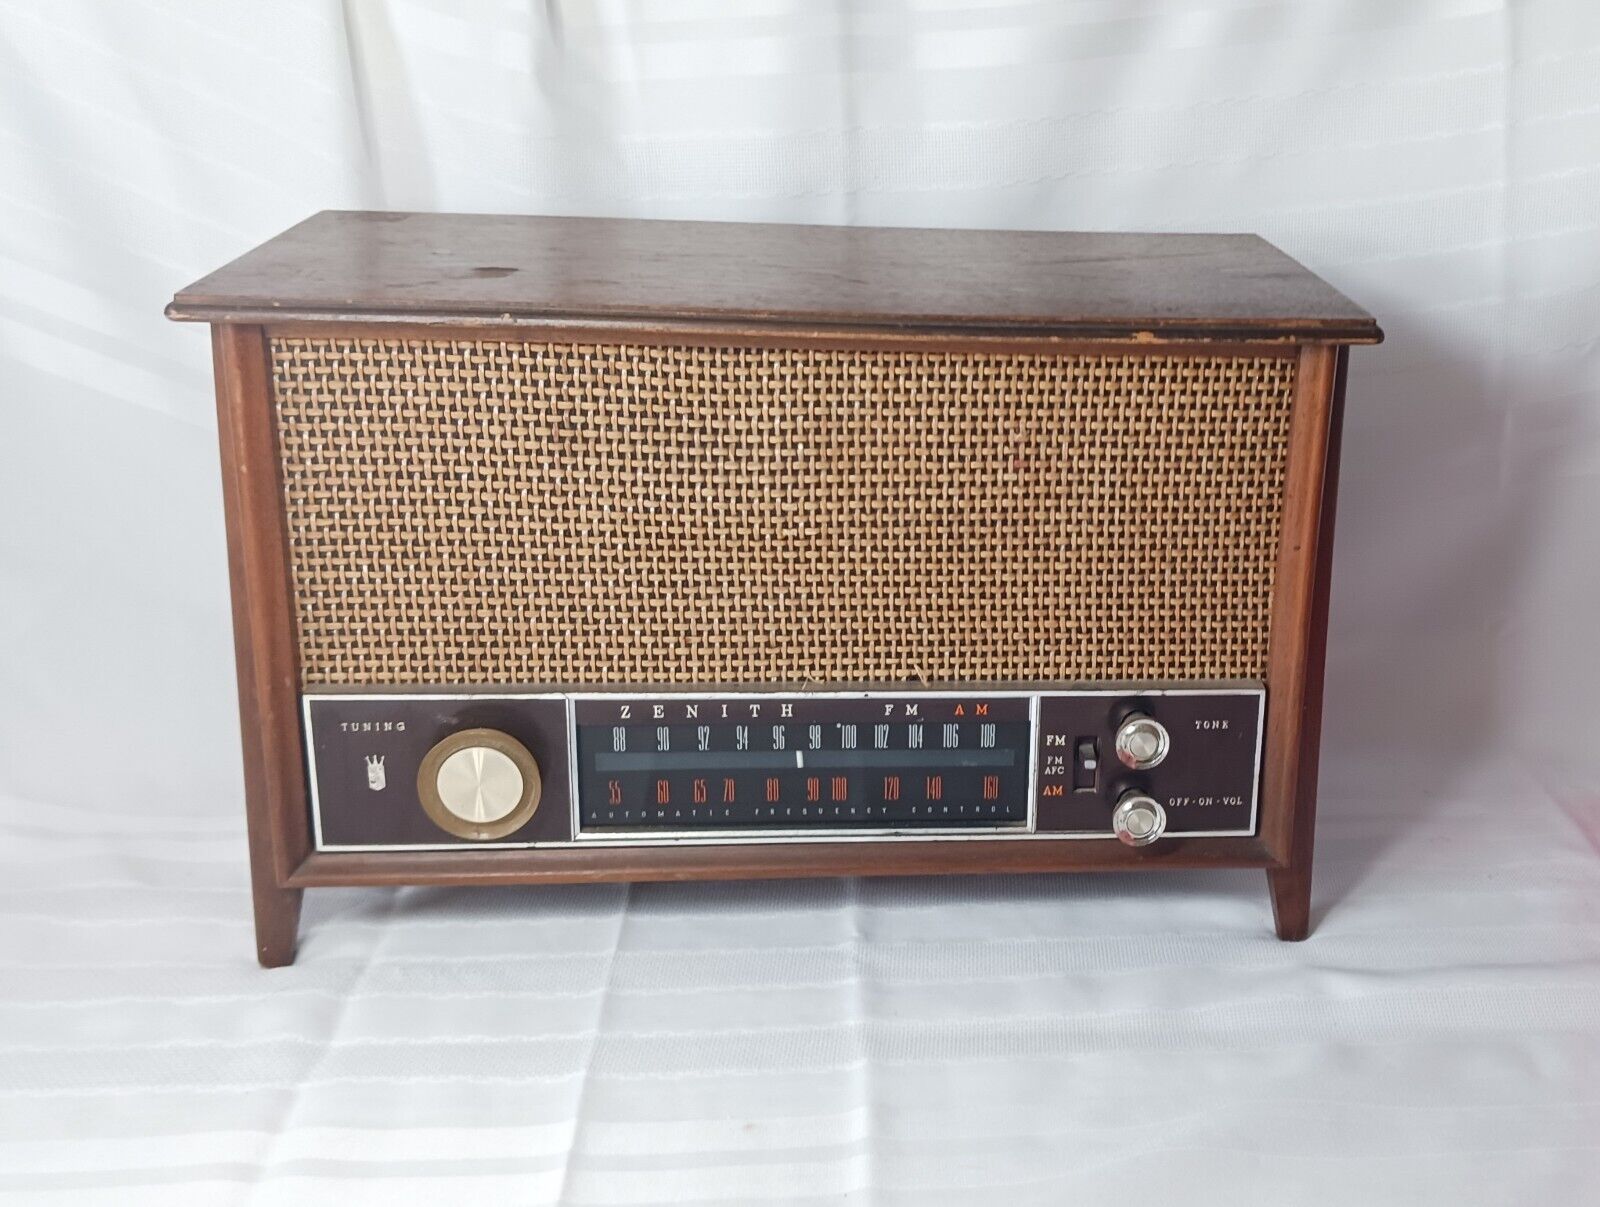 TESTED Vintage Zenith S-58040 Long Distance AM/FM Tube Radio in Wood Cabinet